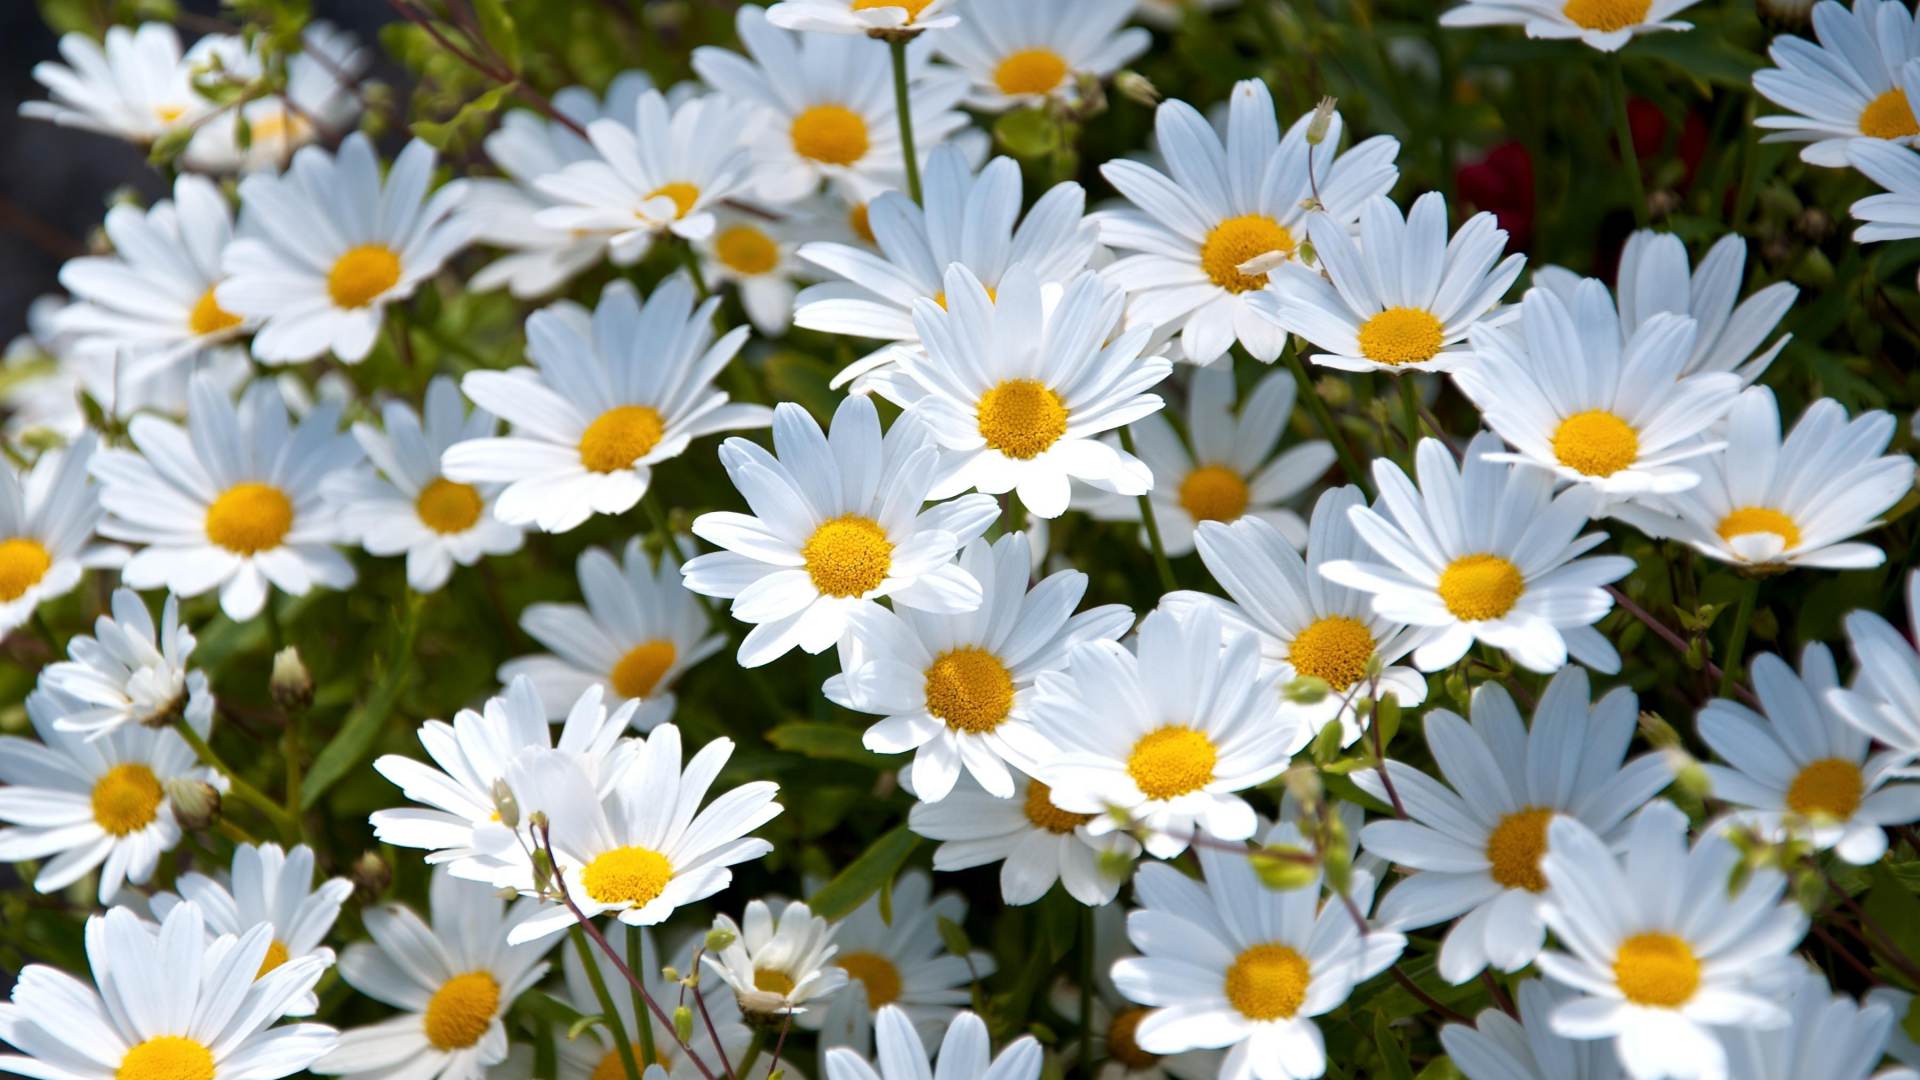 27+ Daisy Backgrounds, Wallpapers, Images, Pictures | Design Trends